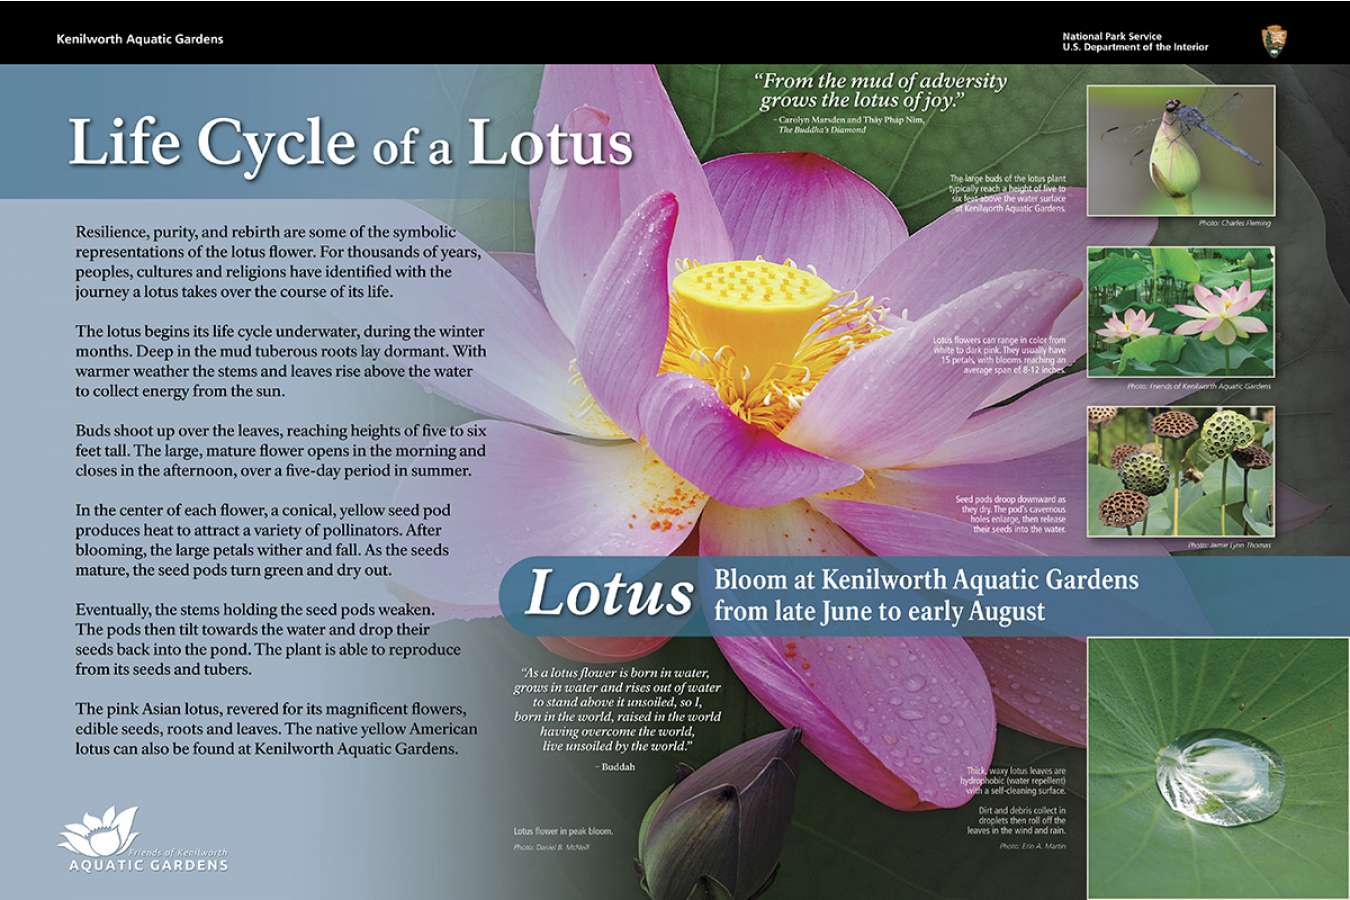 Fokag 3 Lotus : Kenilworth Aquatic Gardens feature Lotus and other ornamental water plants in colorful pond displays